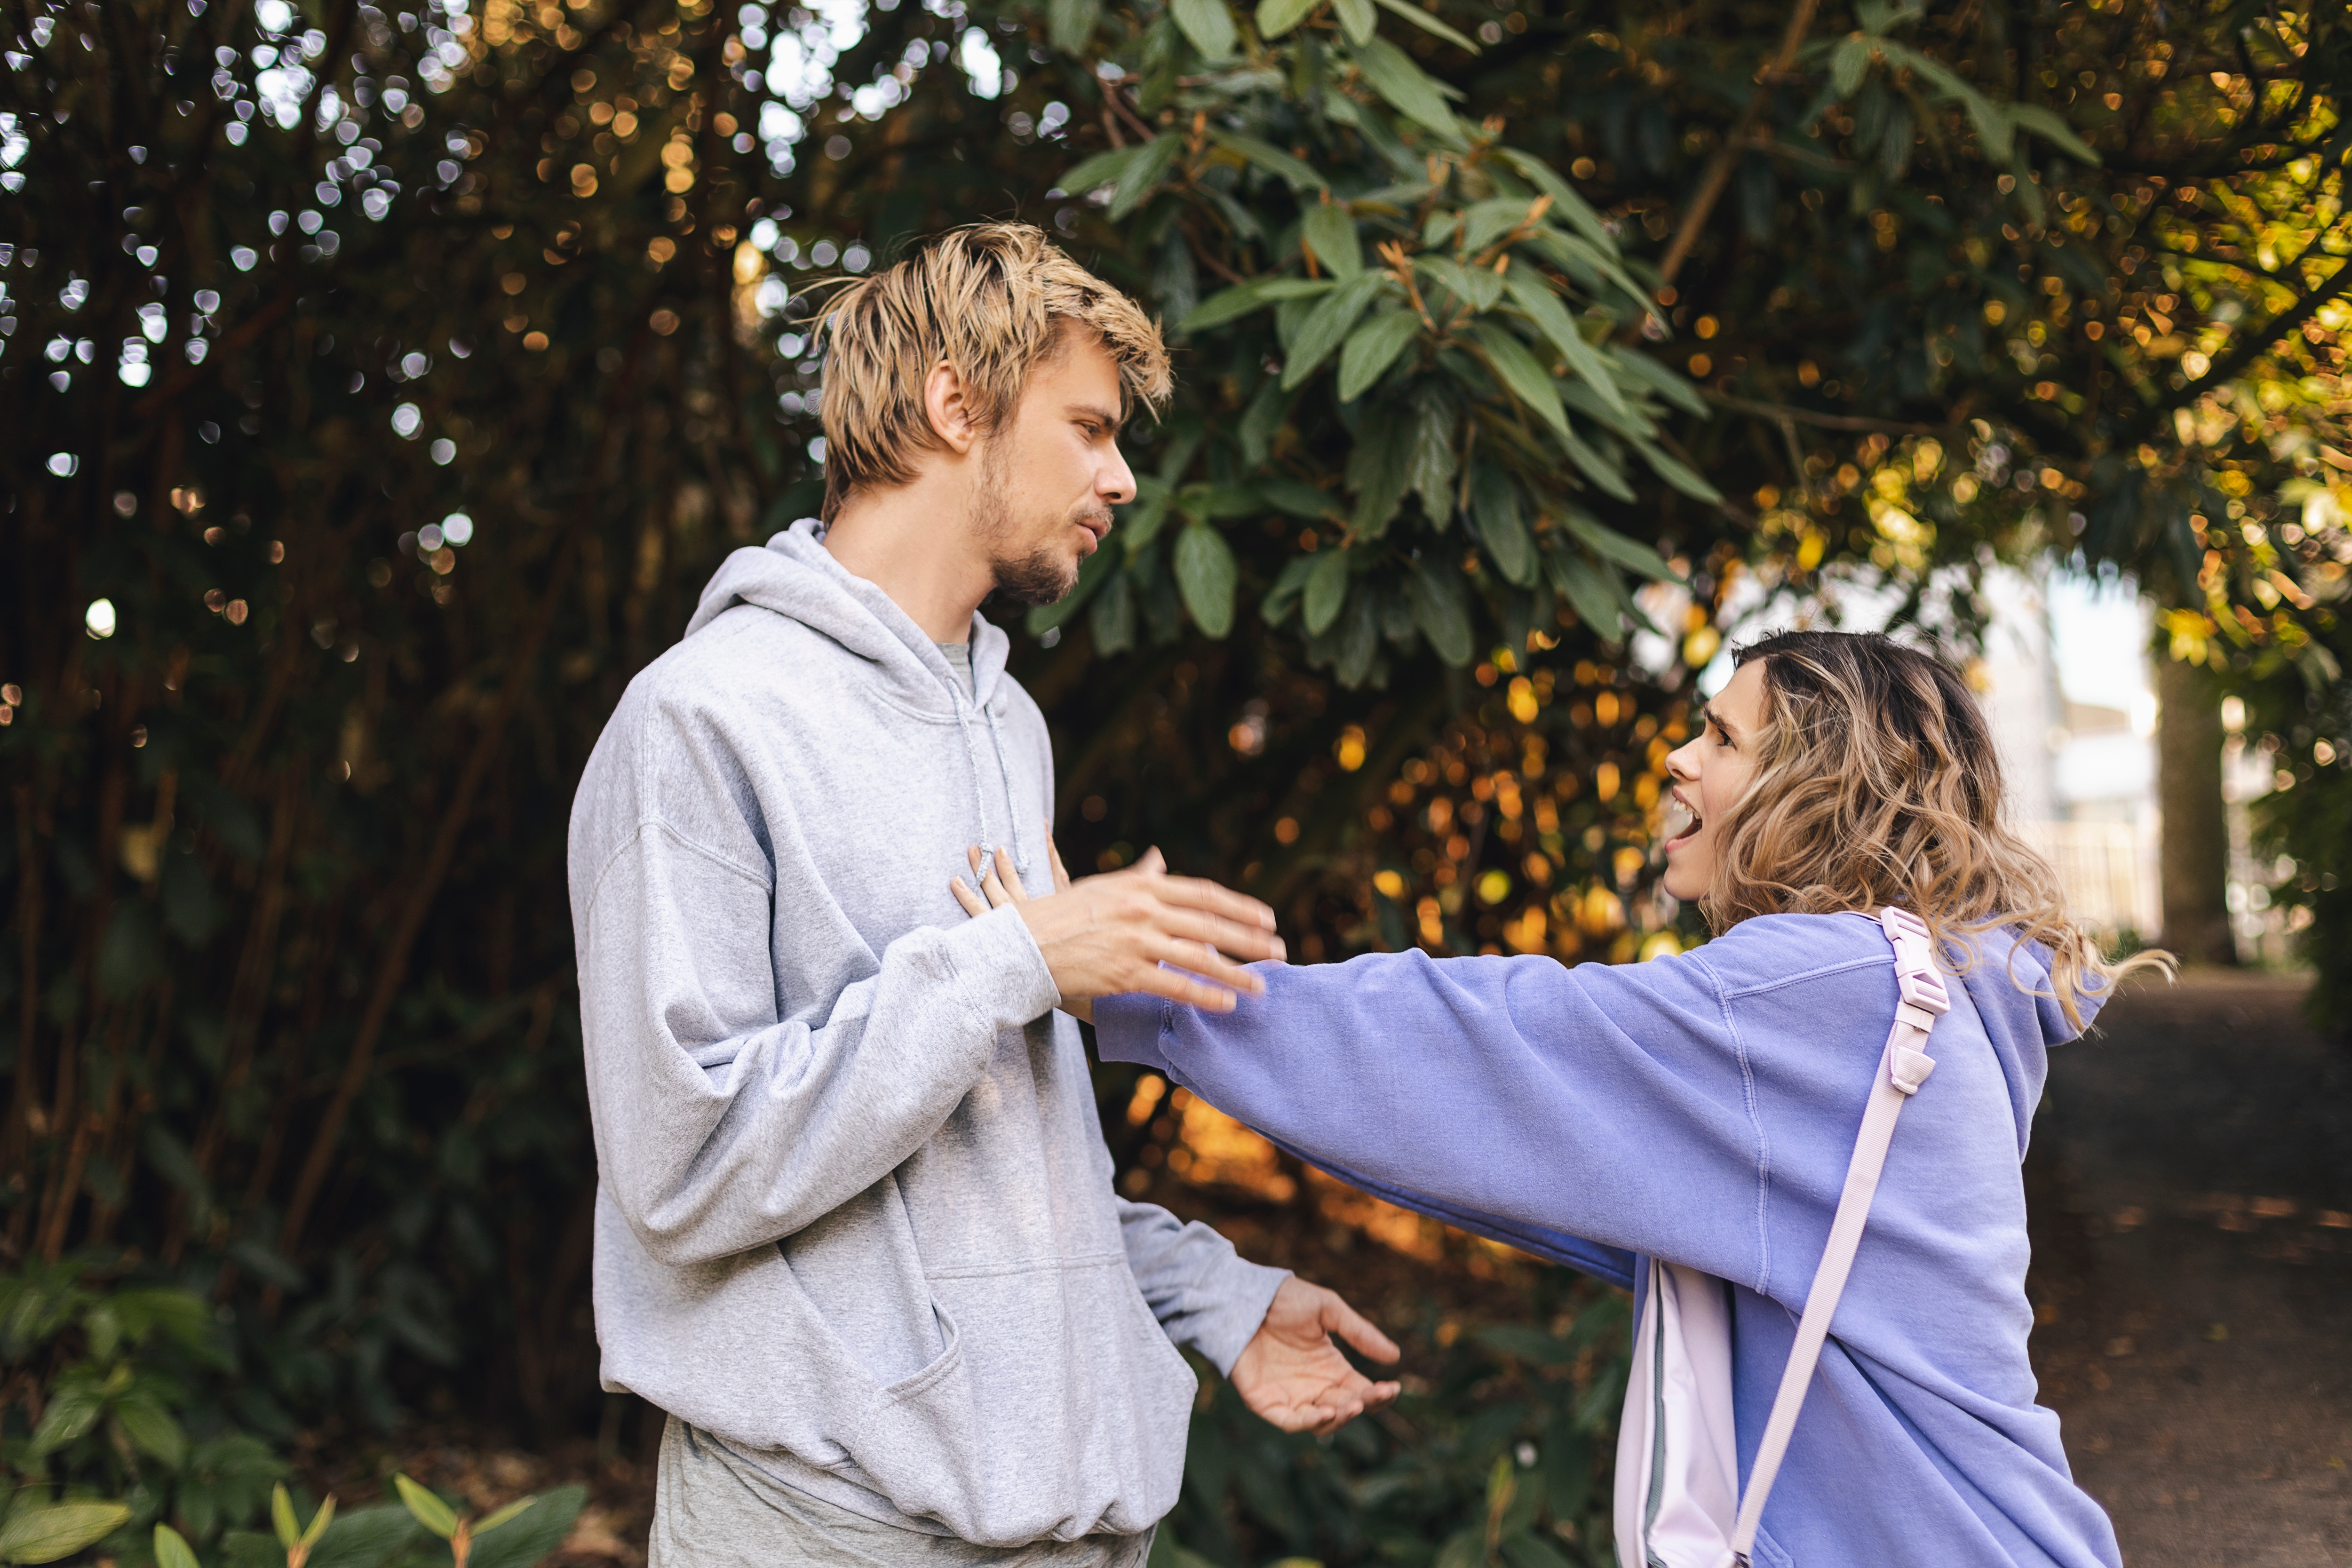 Upset woman in a hoody pushes the man to the side in the park | Source: Shutterstock.com